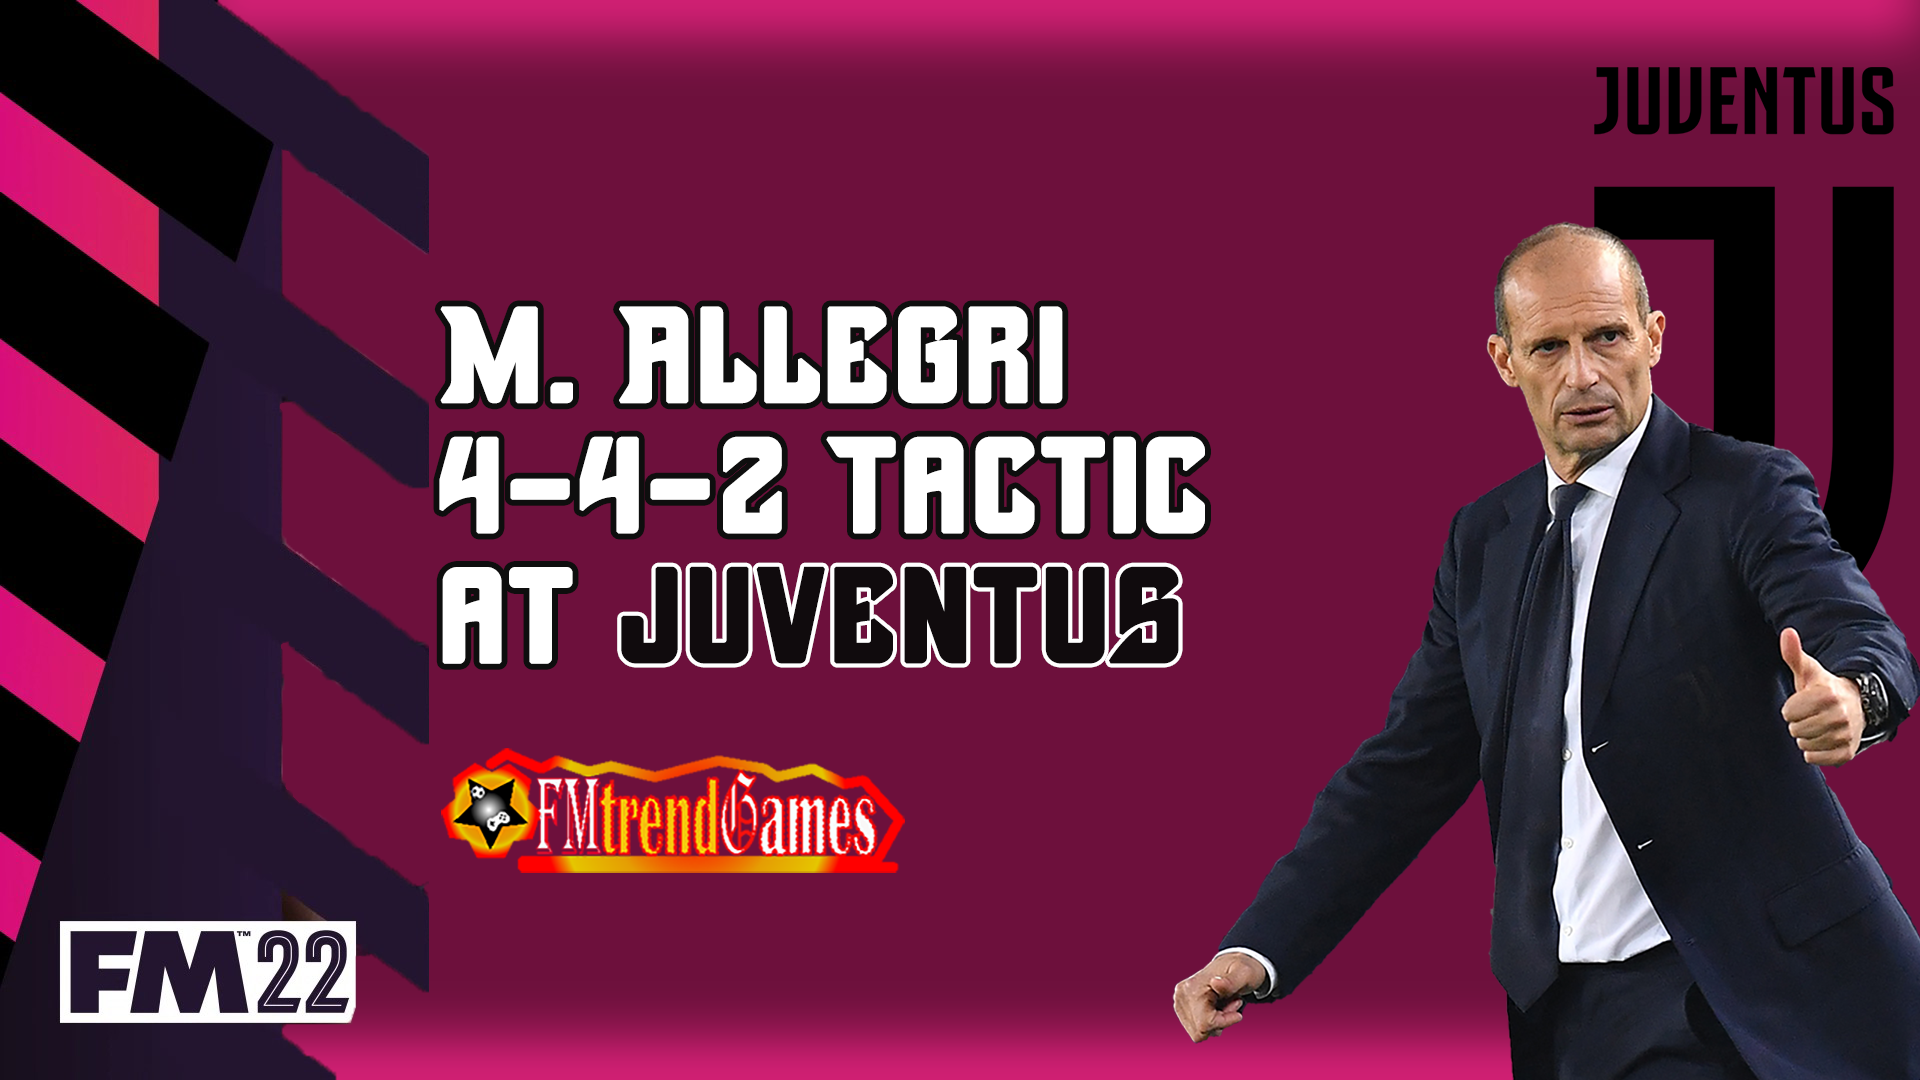 Juventus 21/22 Massimiliano Allegri's 4-4-2 - Football Manager 2022 Mobile  - FMM Vibe